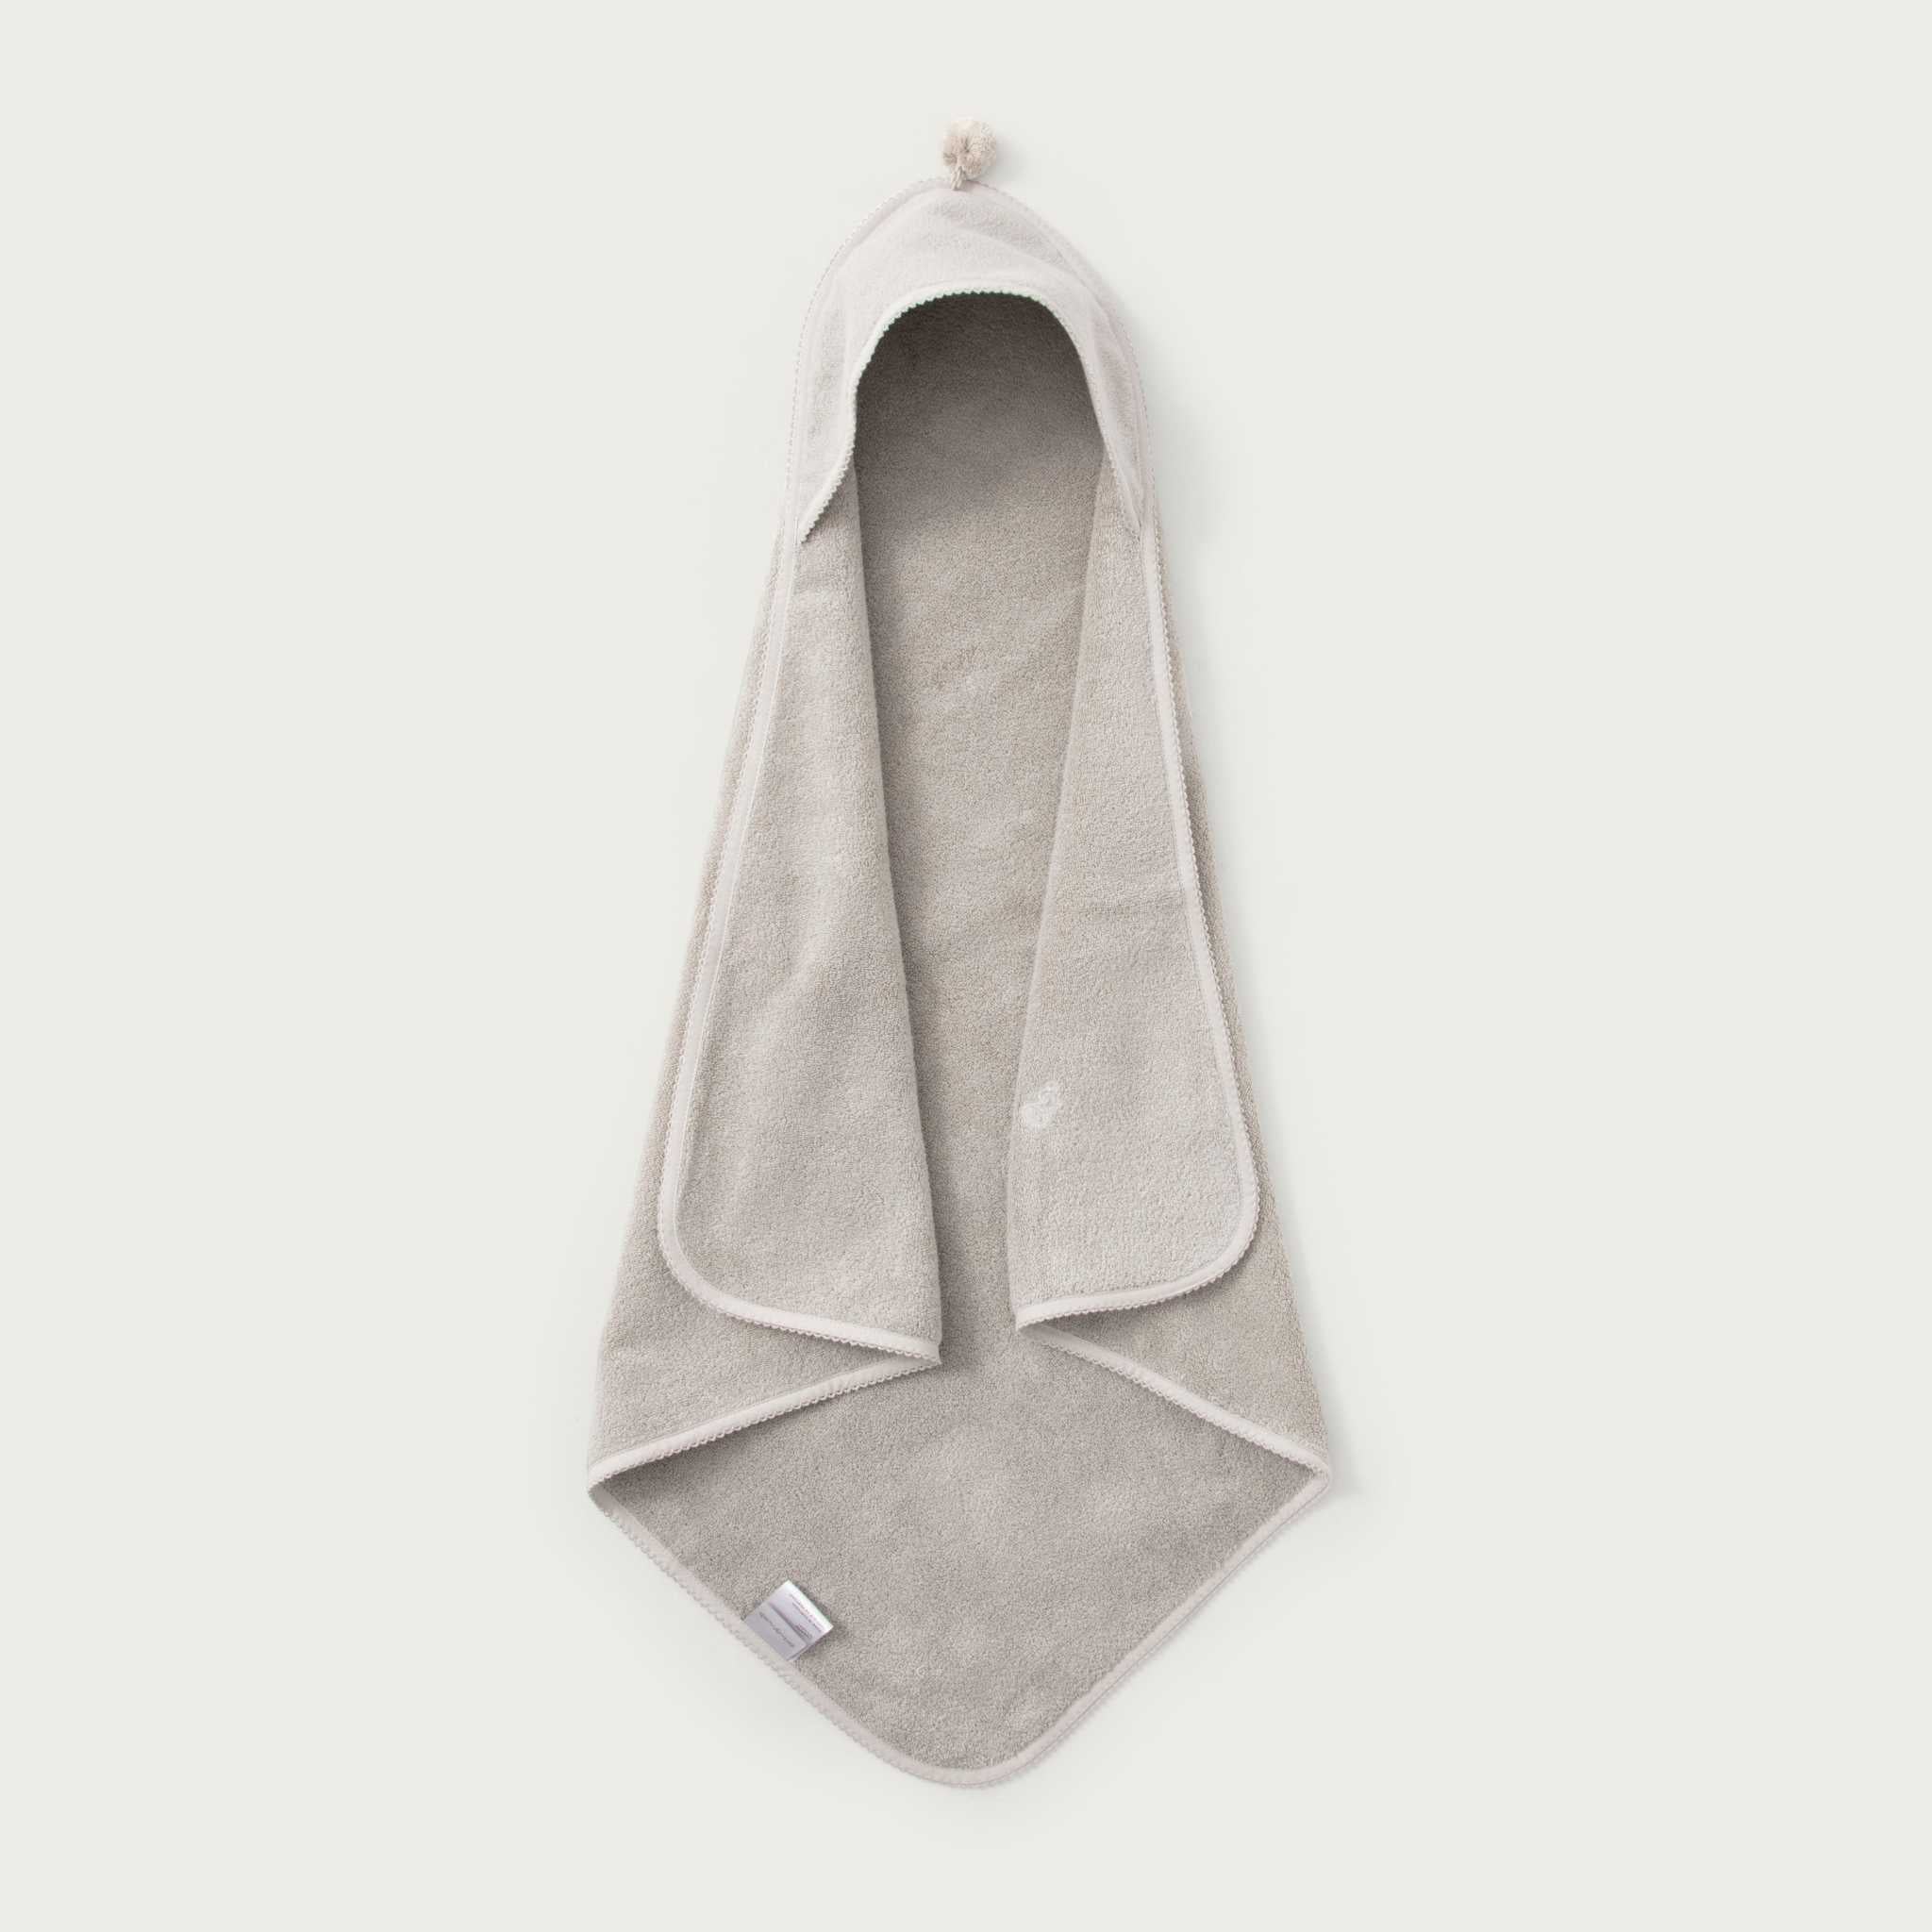 Garbo & Friends Hooded Towel - Thyme - On Grey Background 